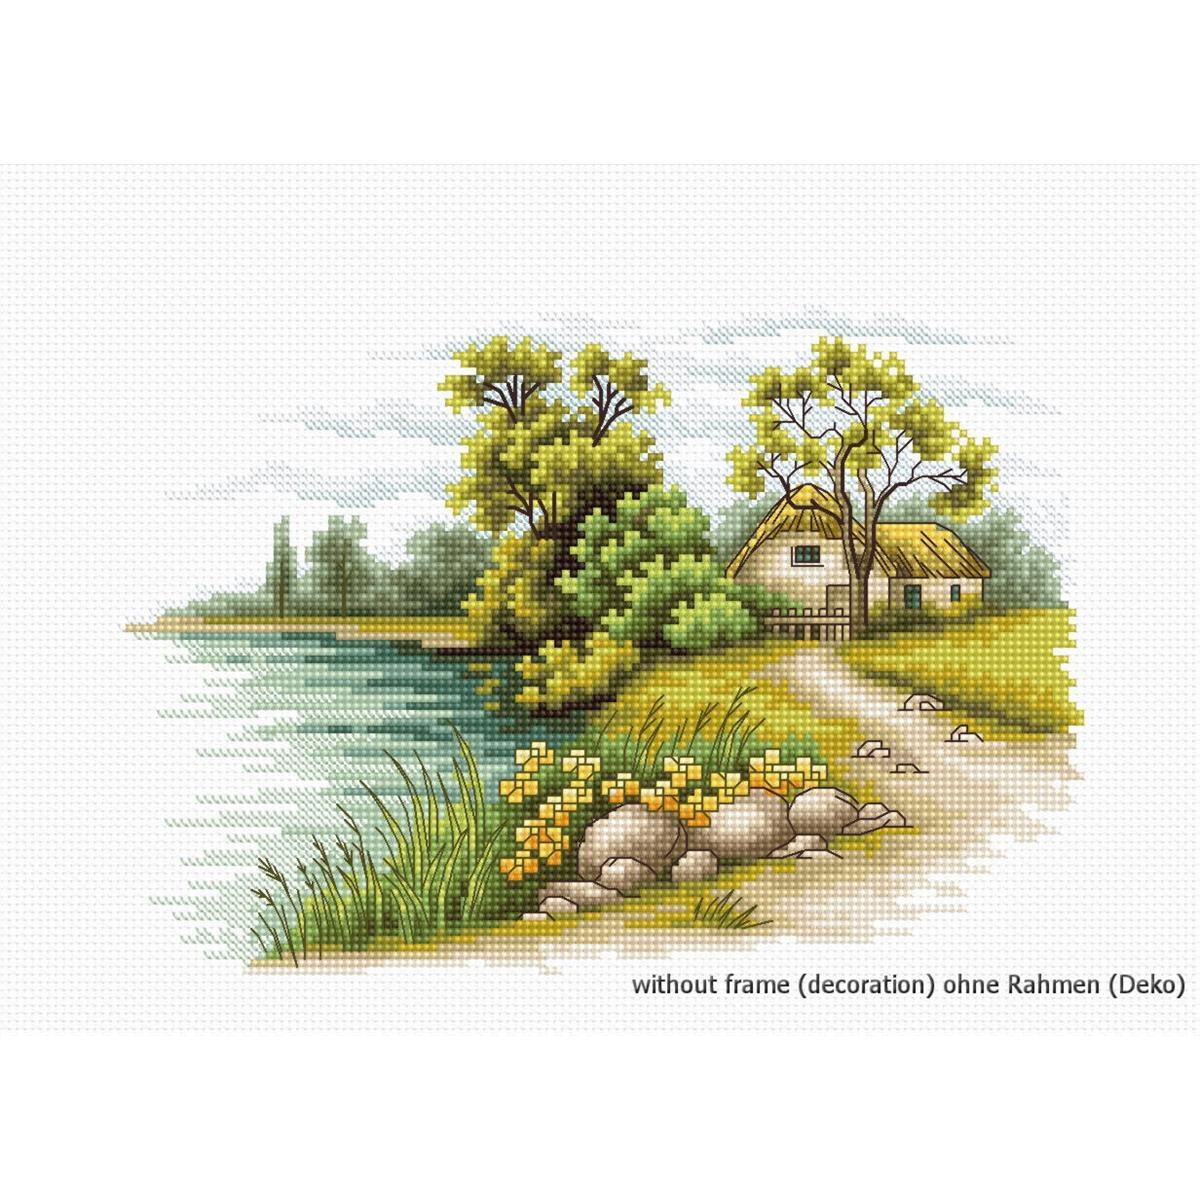 A cross stitch pattern from our Luca-s embroidery kit...